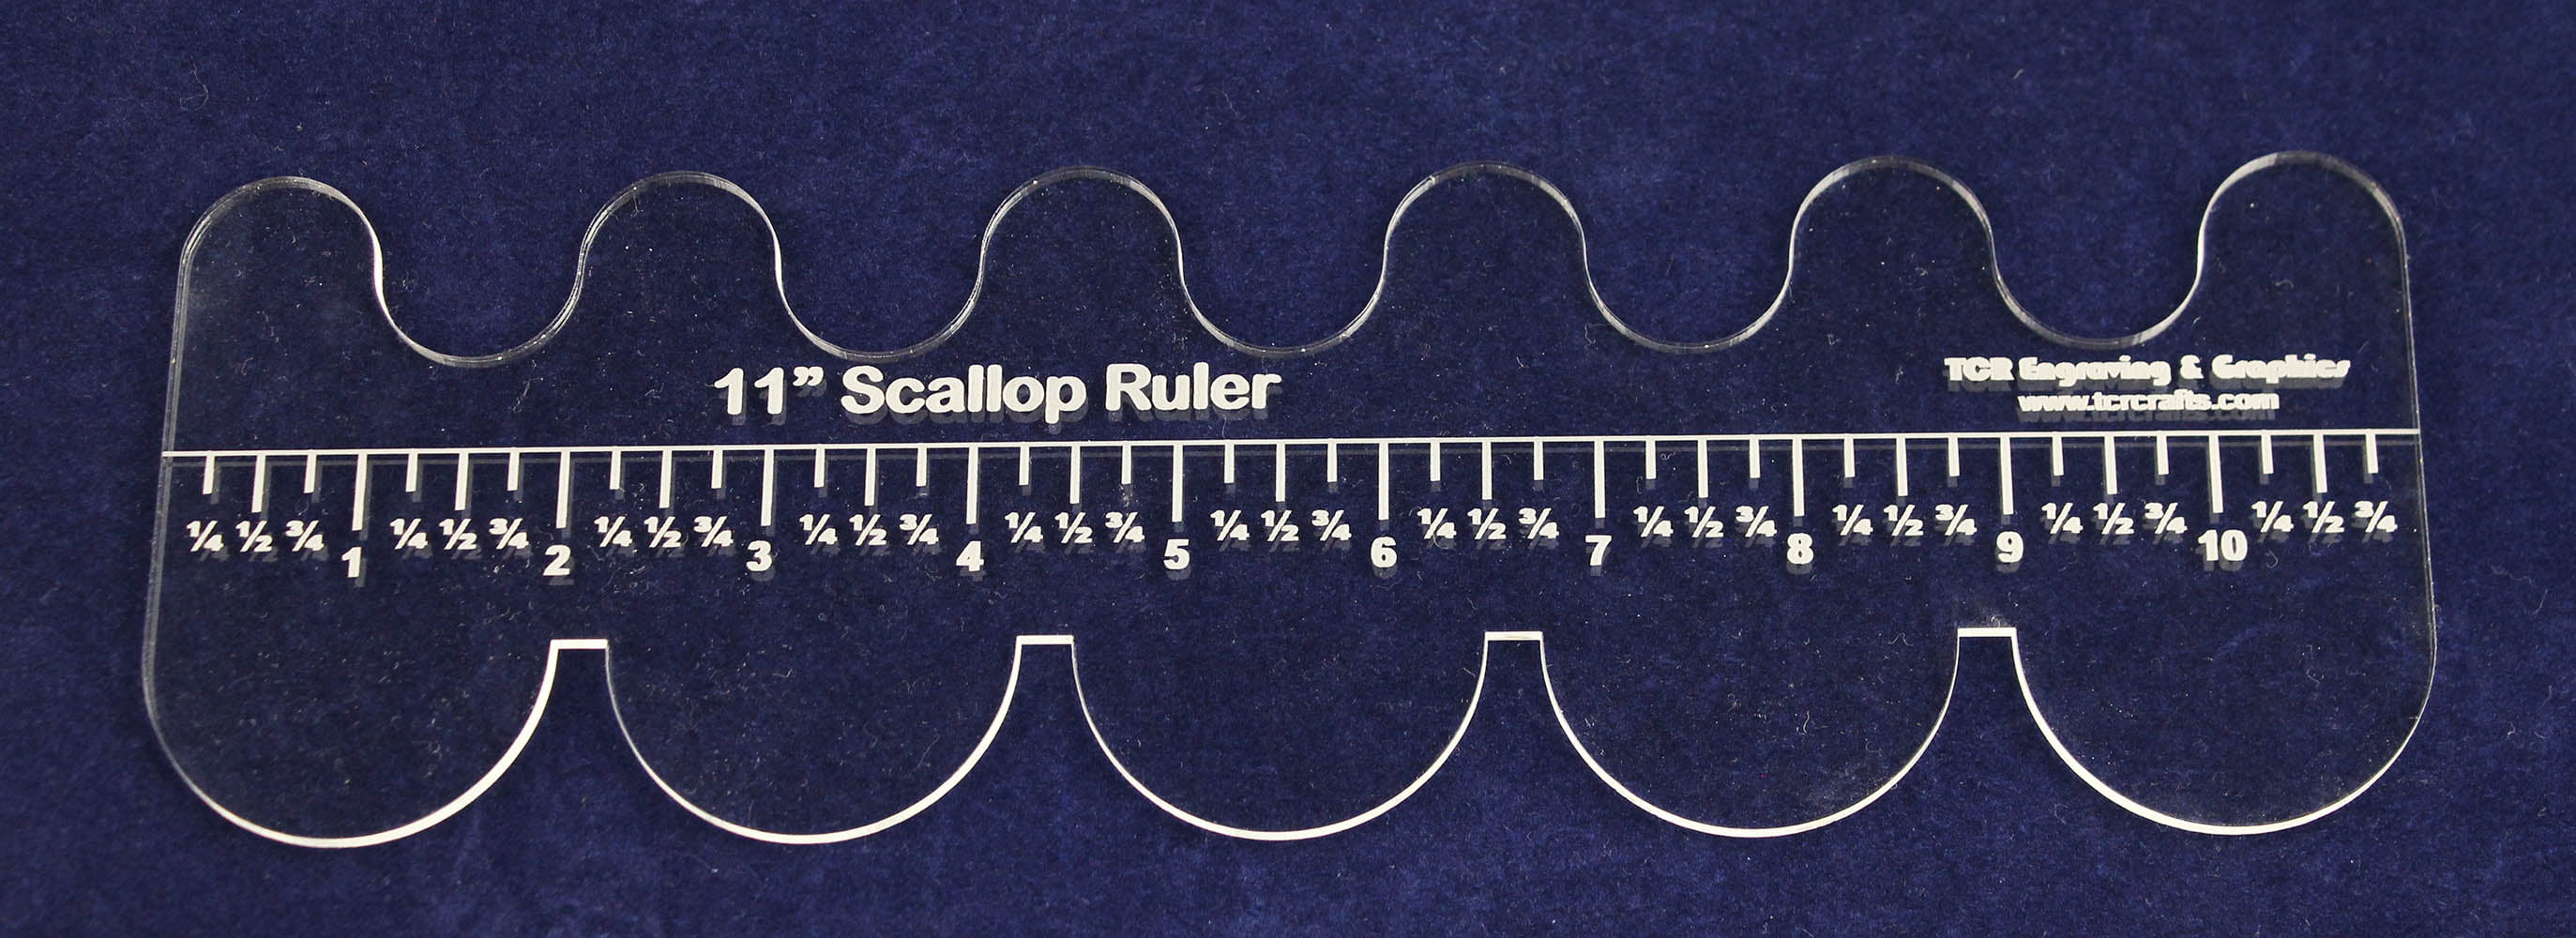 11" Scallop Ruler Clear Acrylic Quilting/Sewing/Embroidery